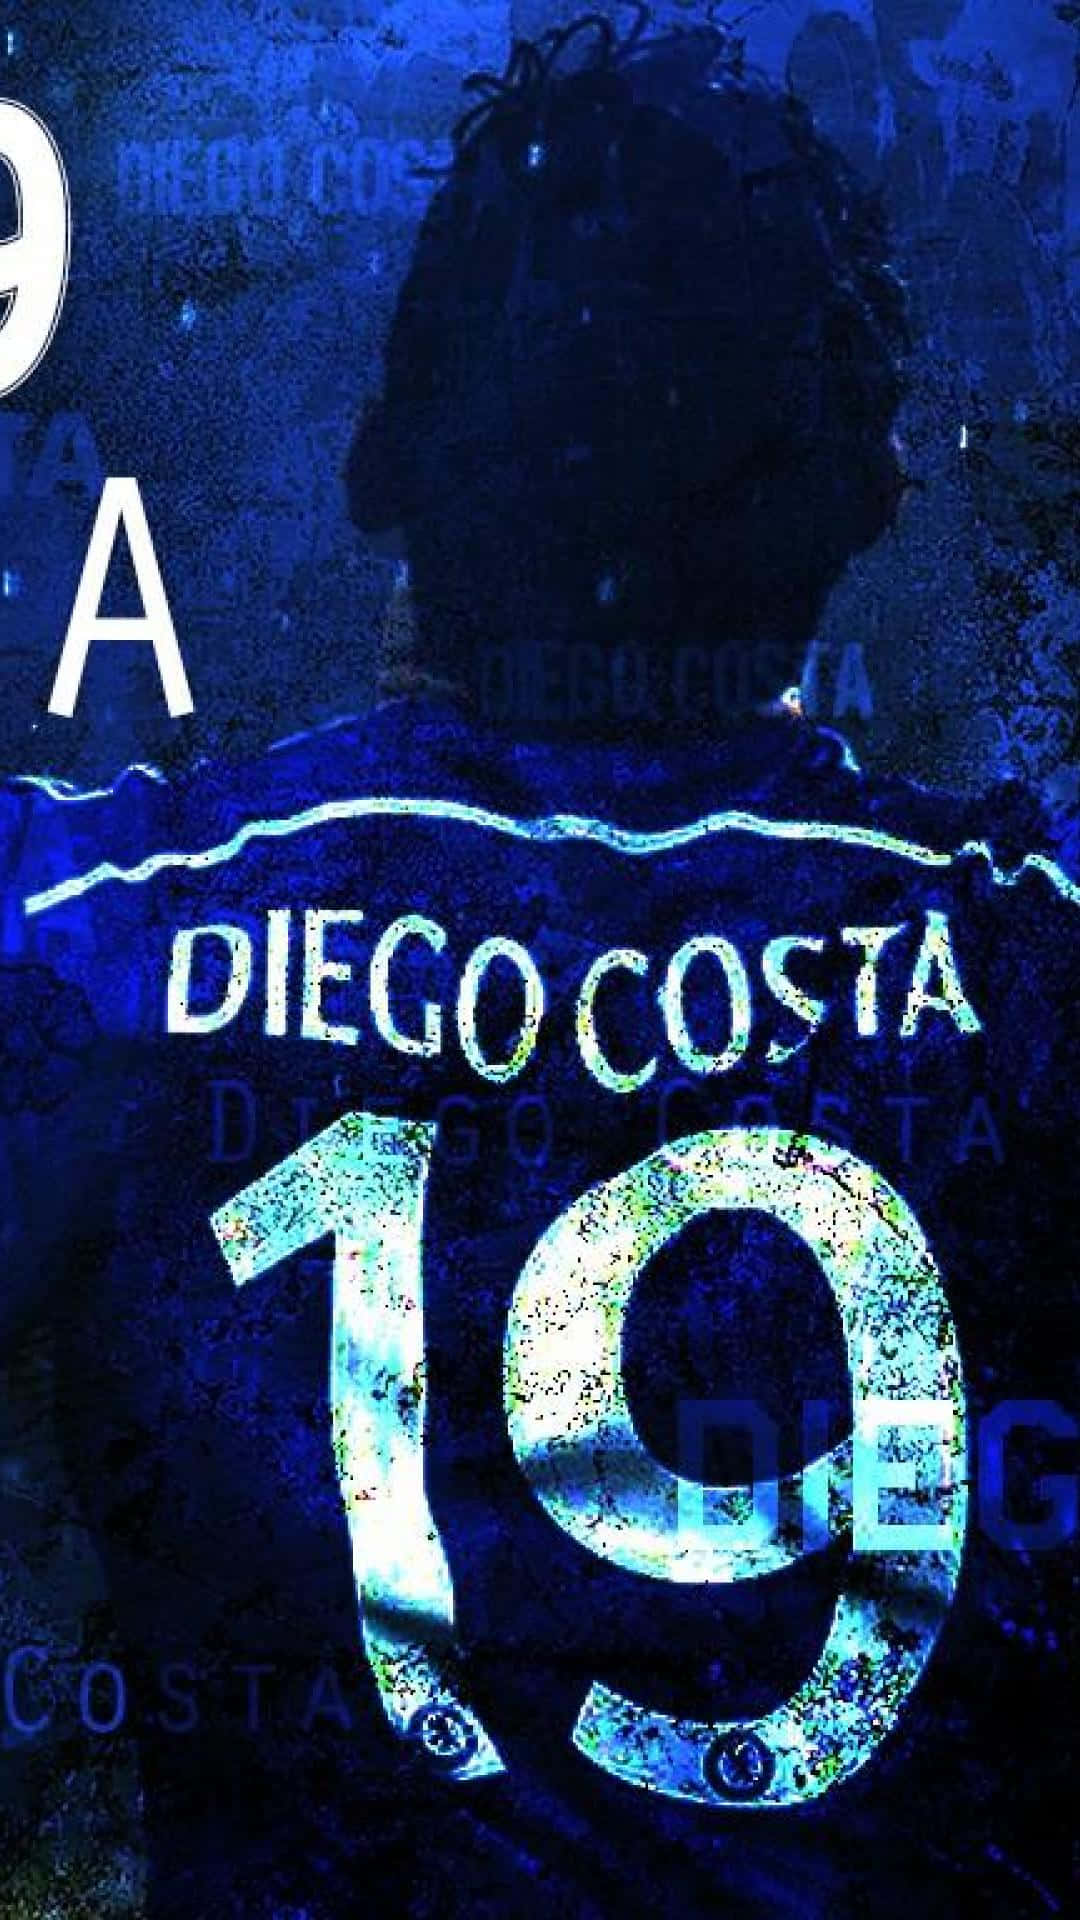 Get the latest Chelsea team news on your iPhone Wallpaper